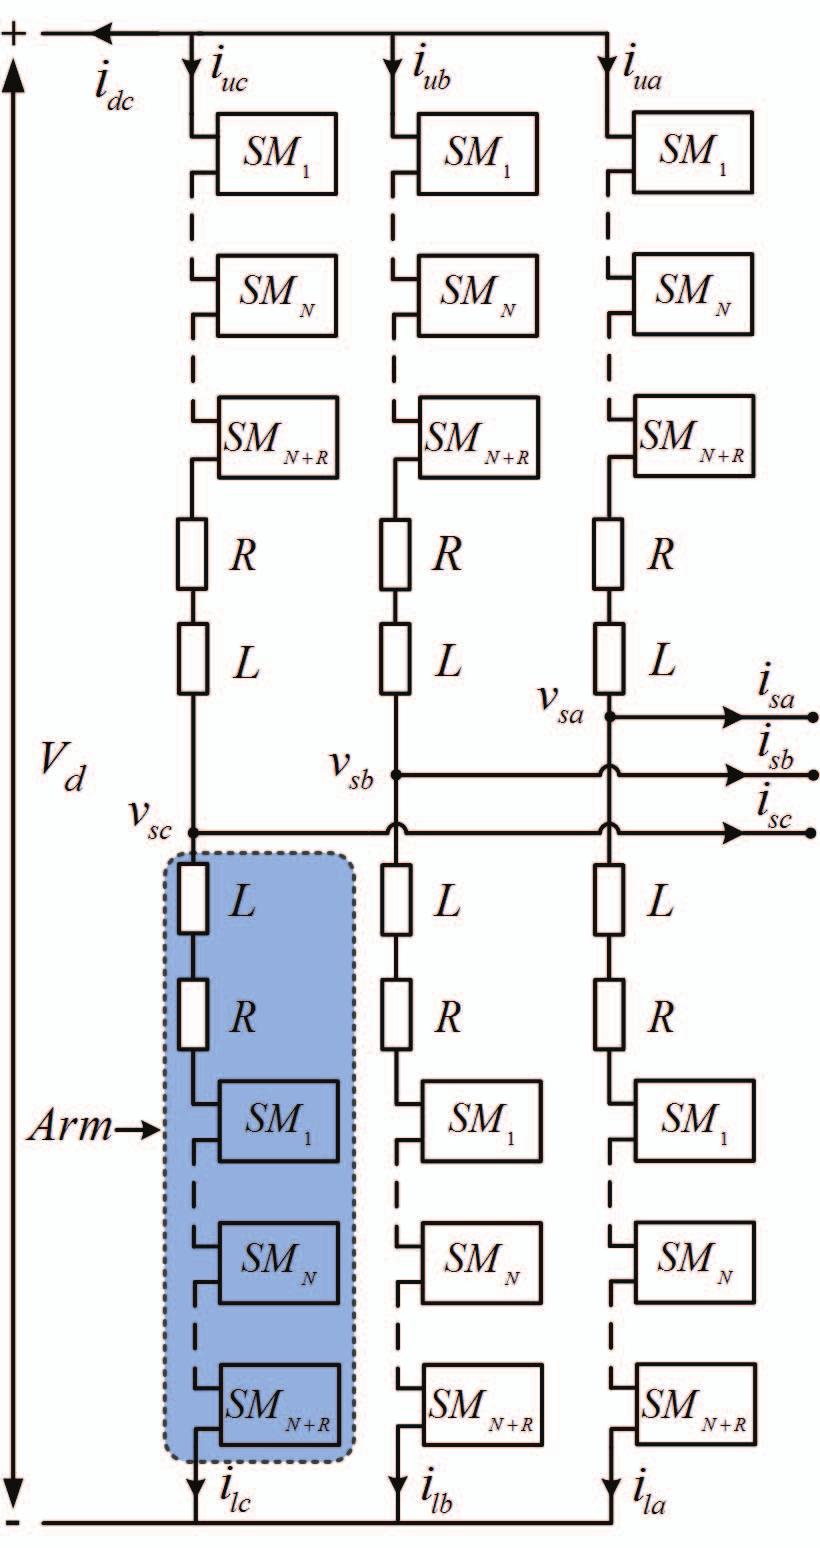 based on the instantaneous value of the capacitor voltages and direction of the arm current as discussed in [21].